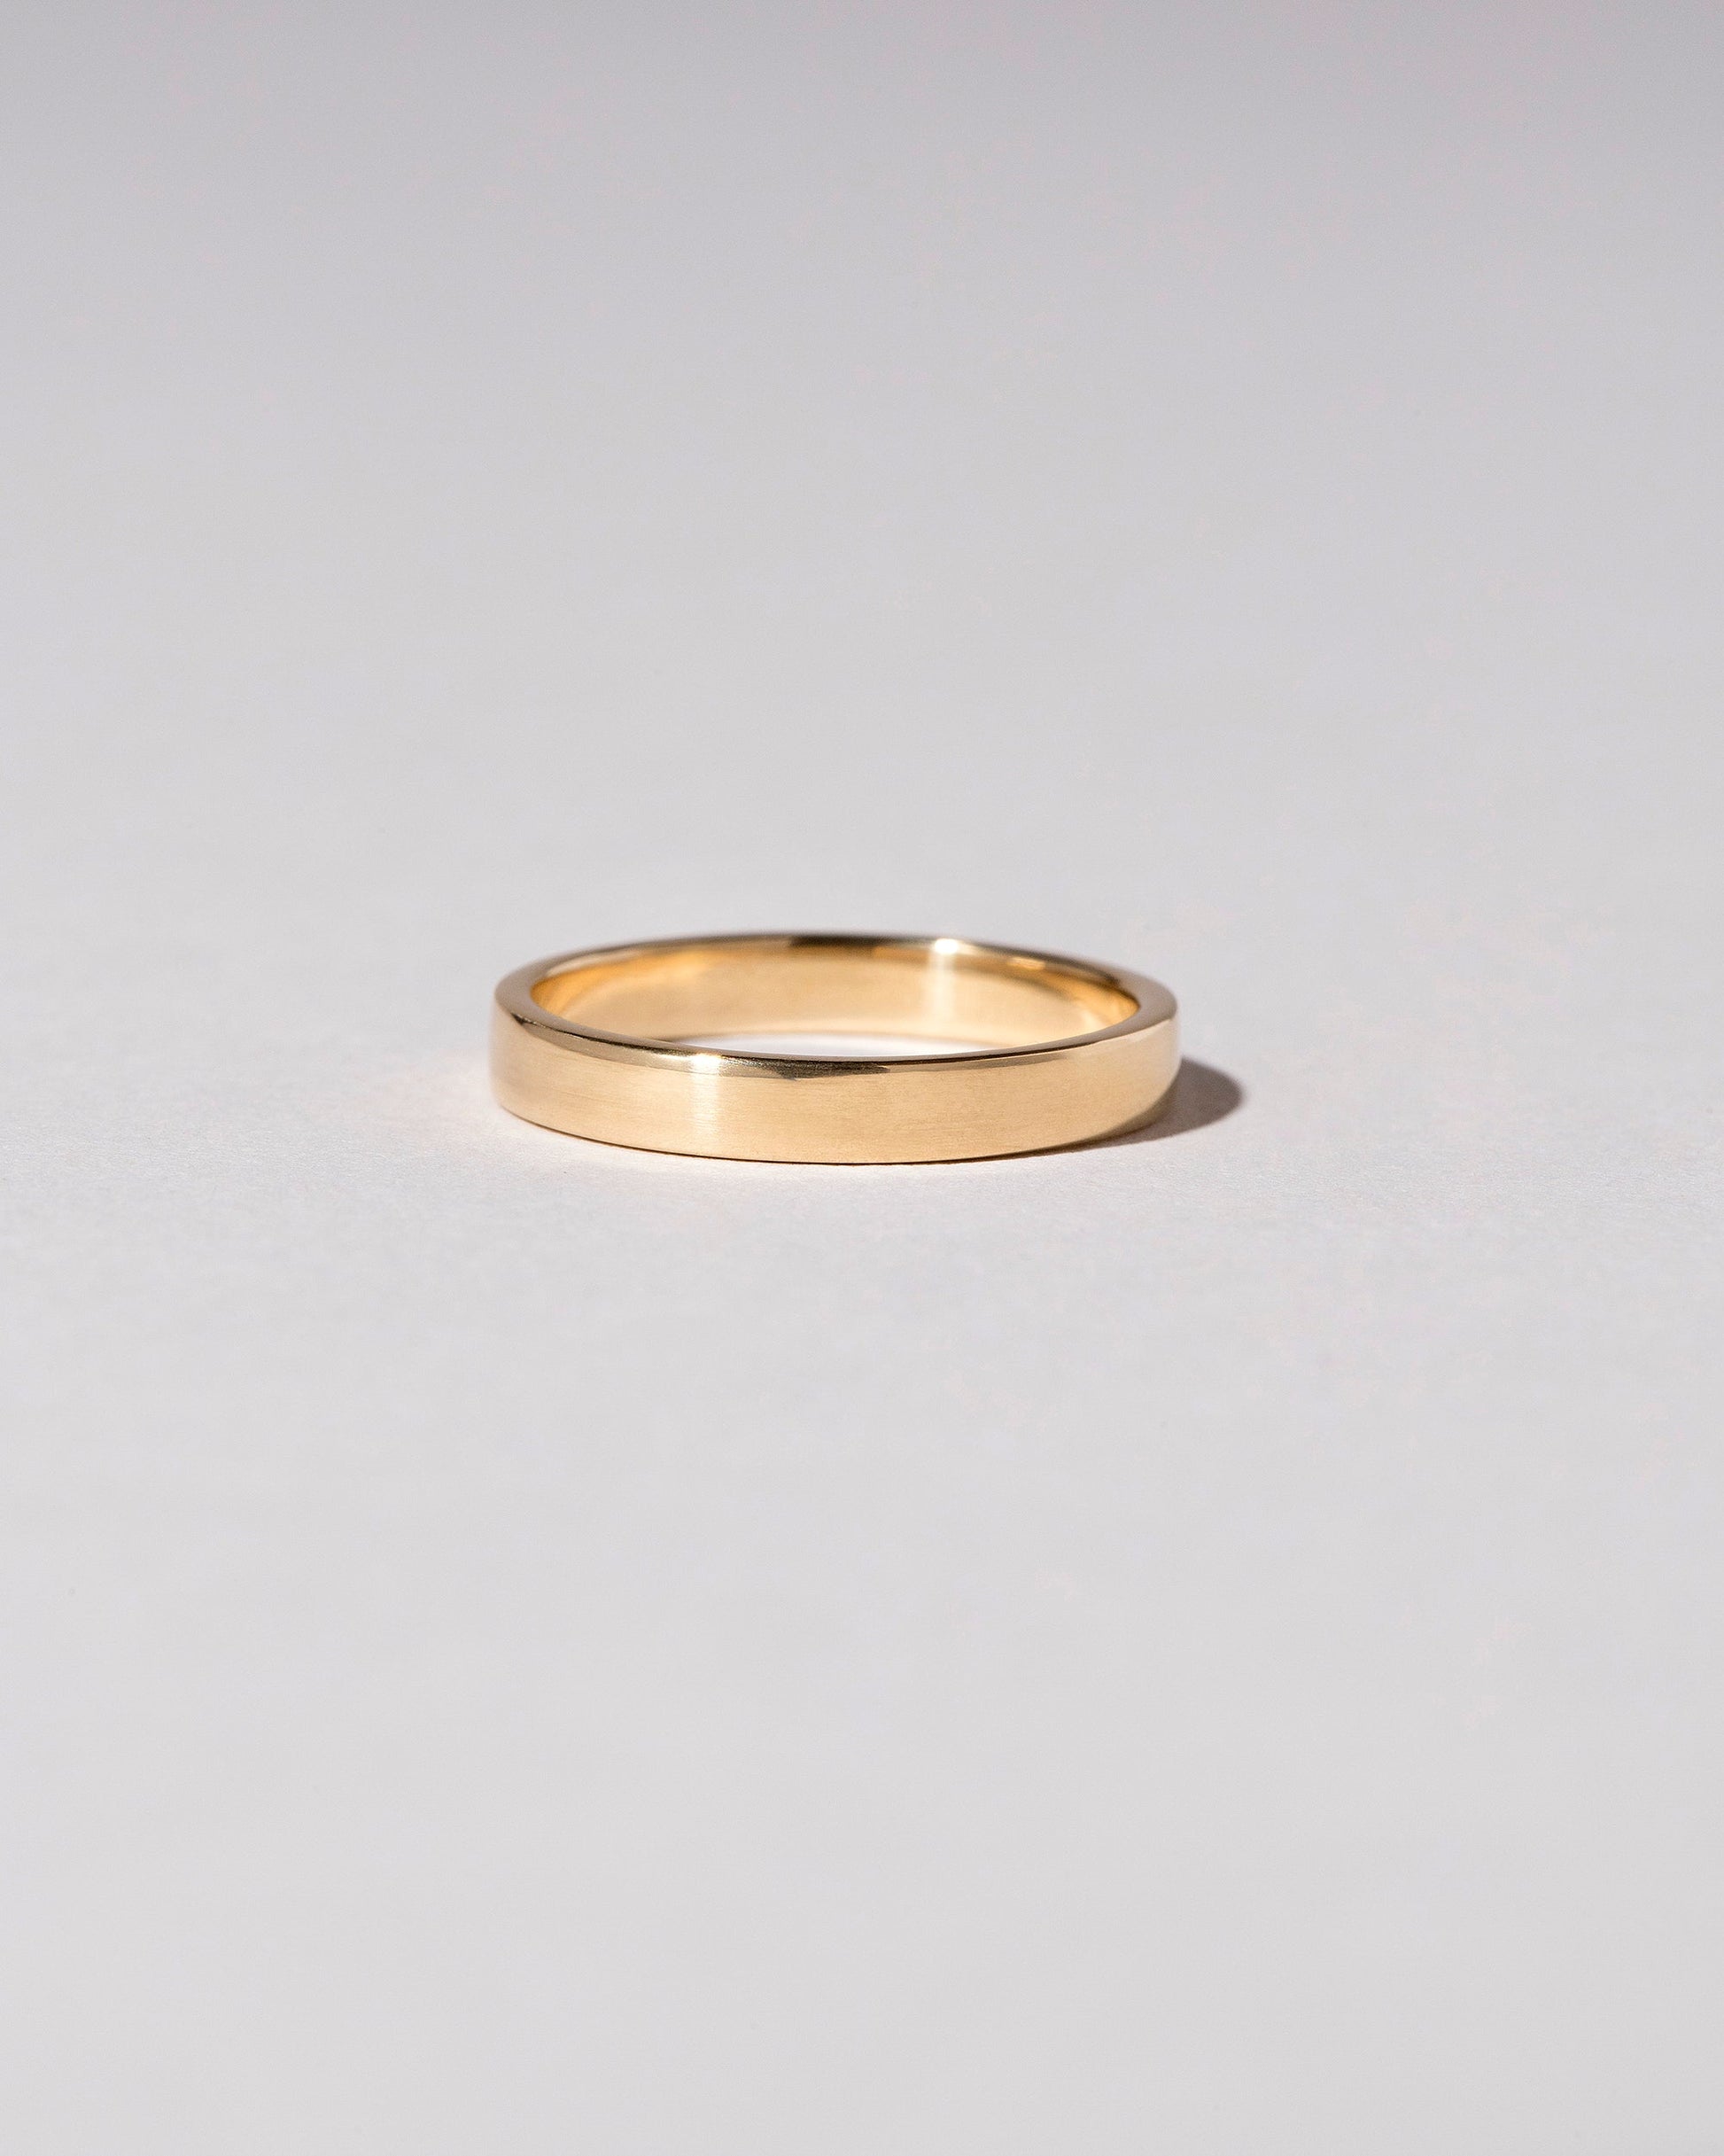 Gold 4mm Square Wire Band on light color background.